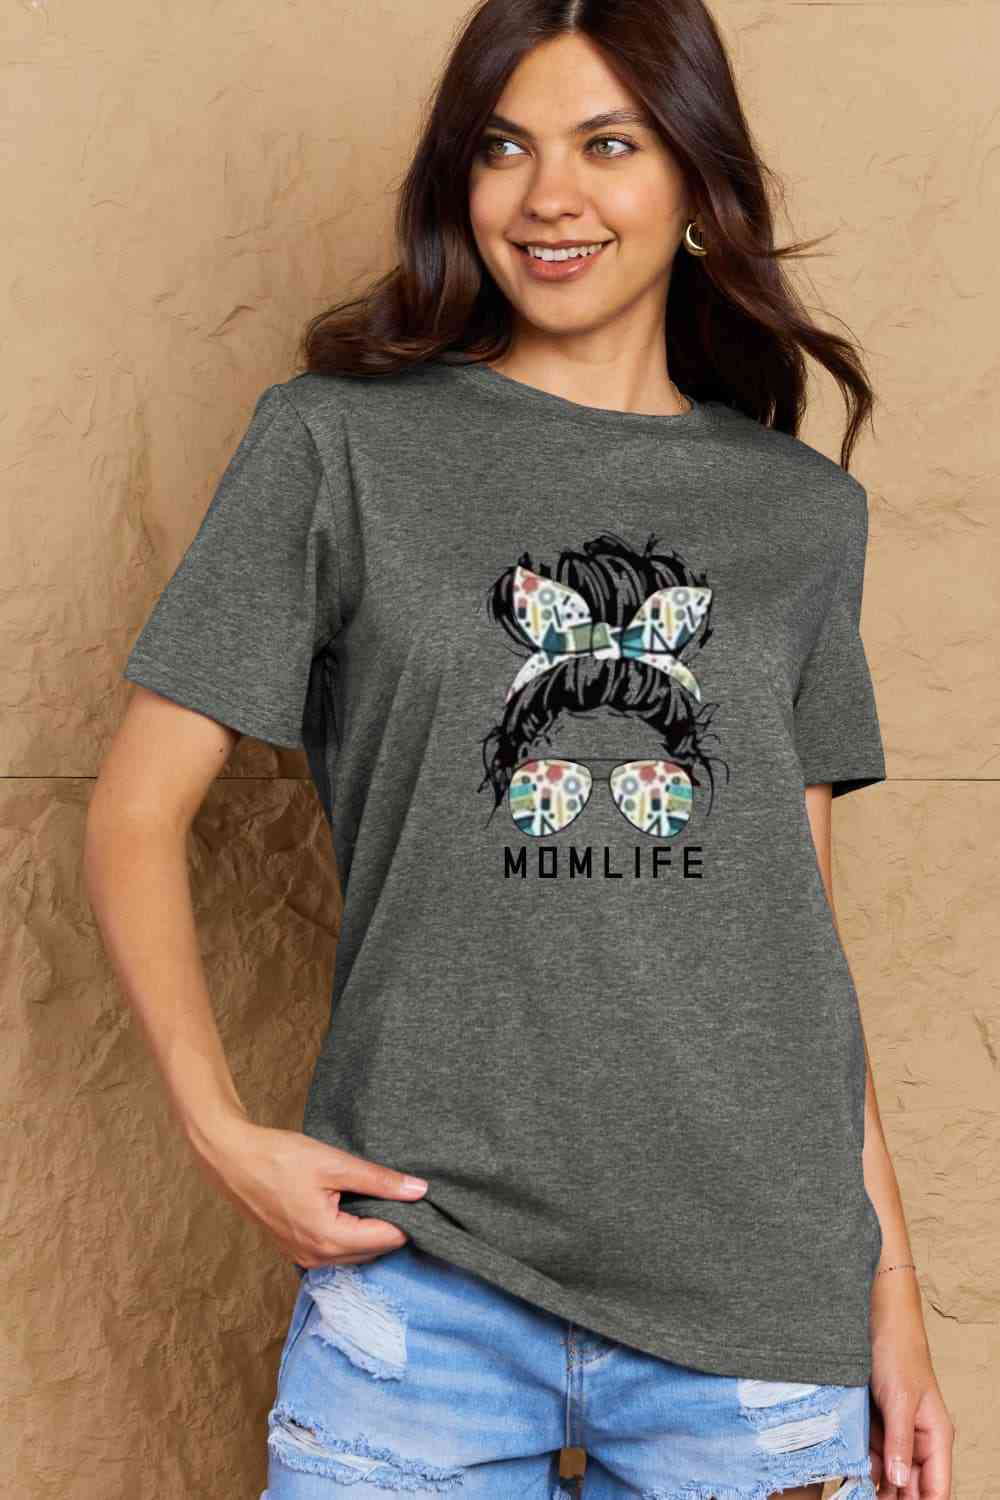 Simply Love Full Size MOM LIFE Graphic Cotton T-Shirt (4 Colors)  Krazy Heart Designs Boutique Charcoal S 